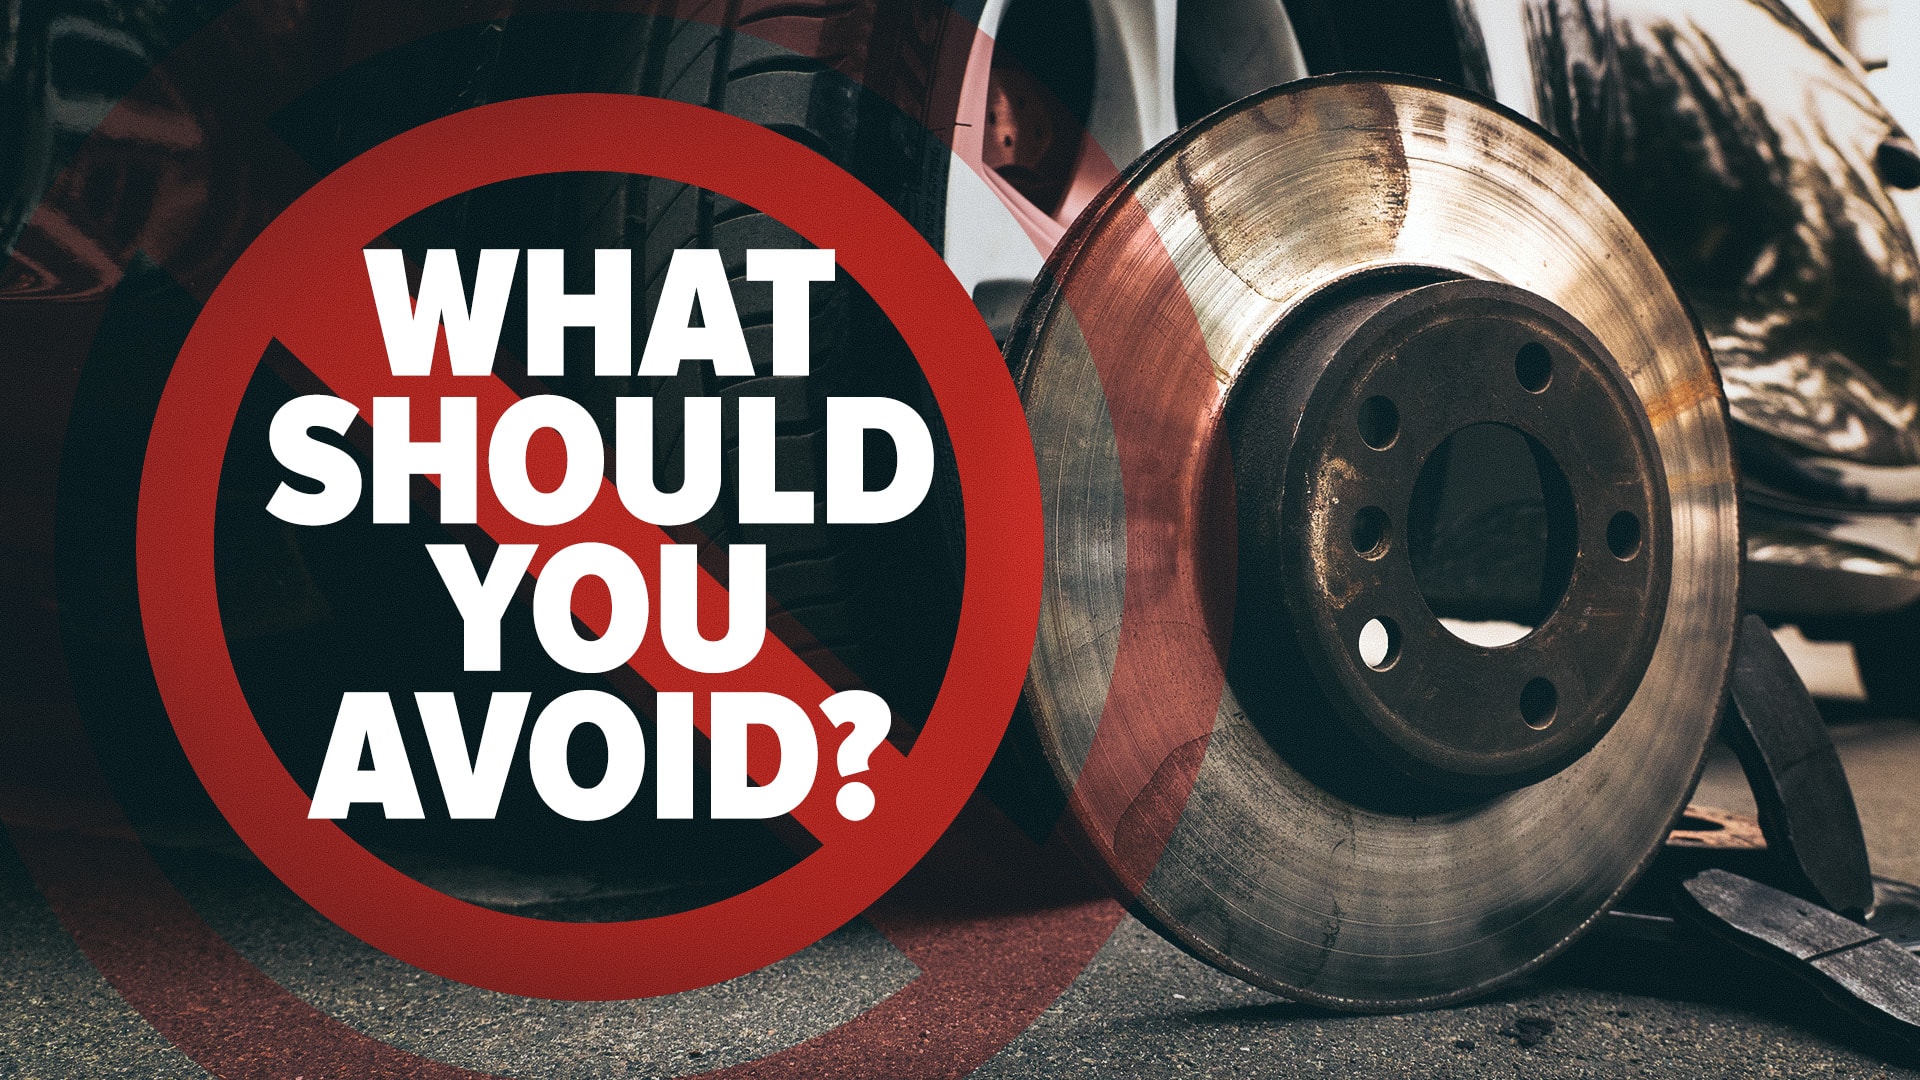 Brake discs overheating: why it happens and how to fix it